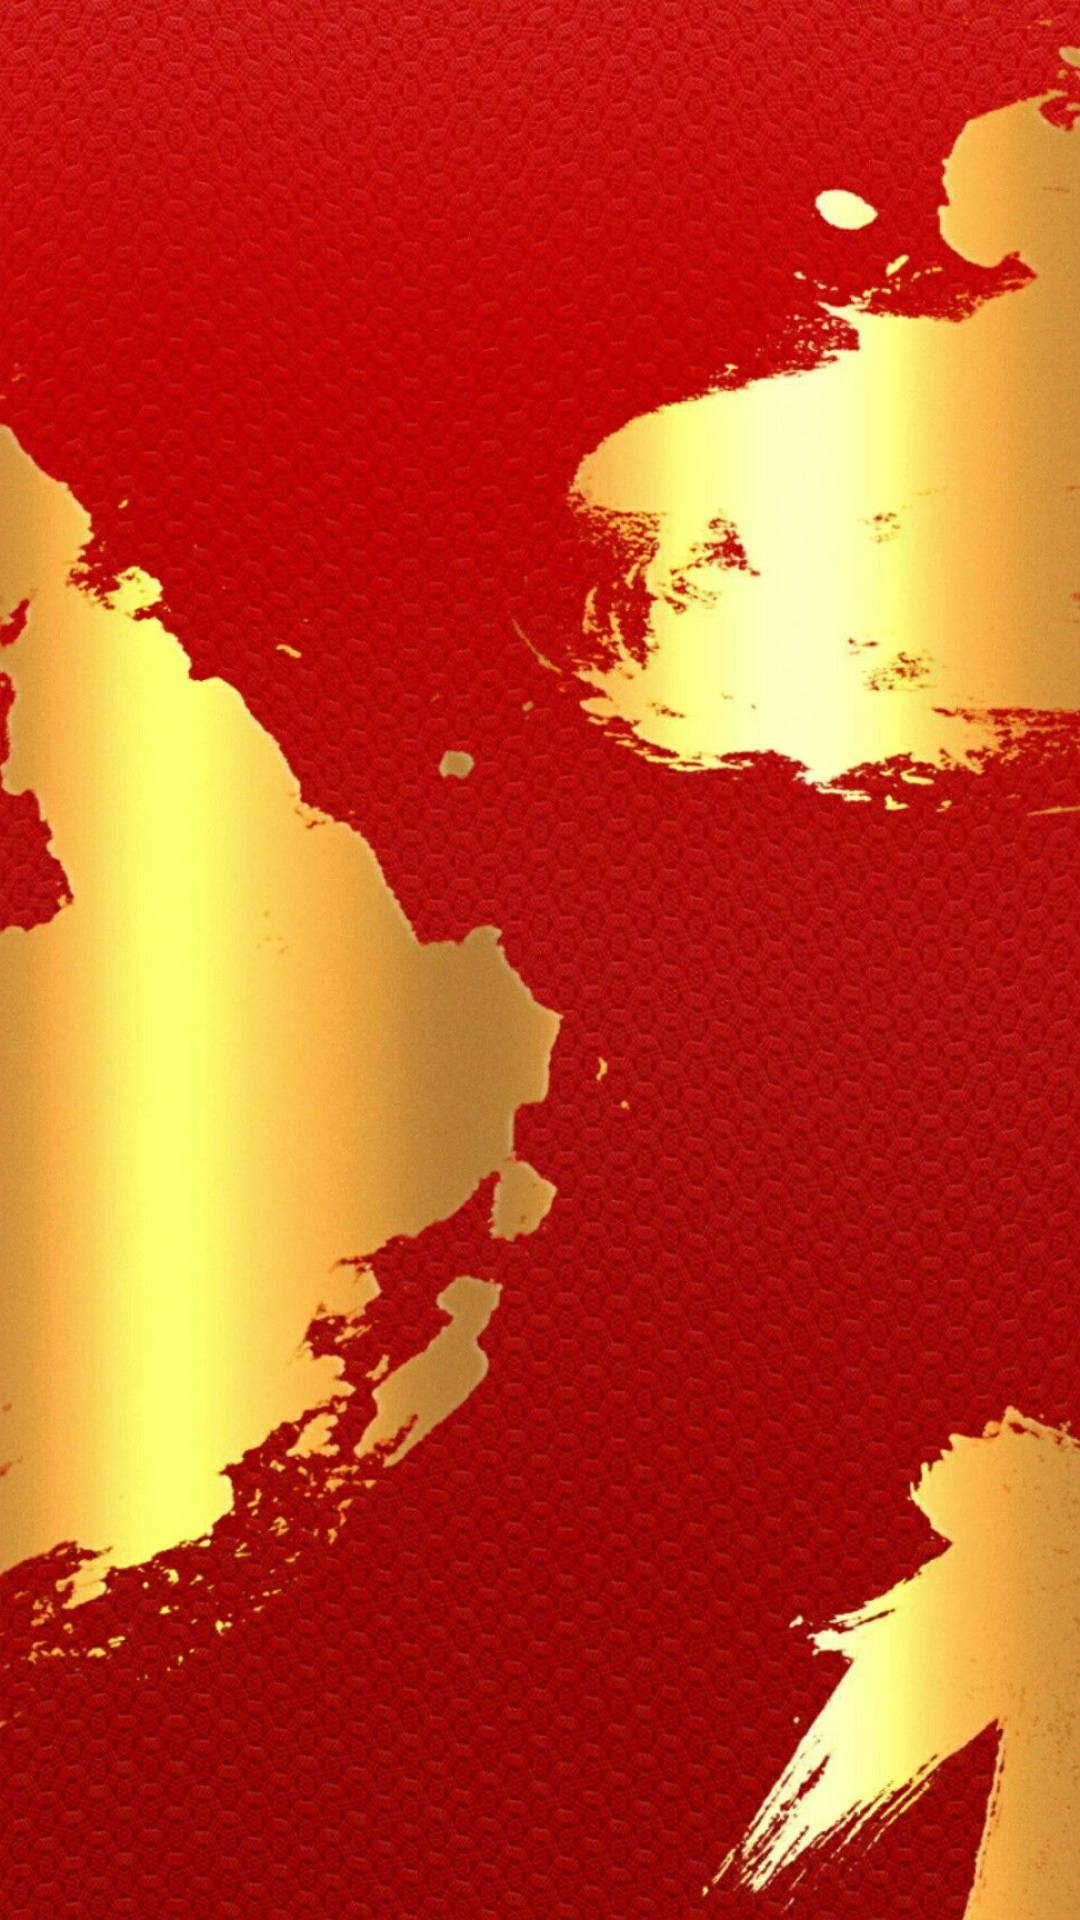 1080x1920 Pin by juan on wallpapers samsung | Red and gold wallpaper, Gold wallpaper iphone, Cellphone wallpaper